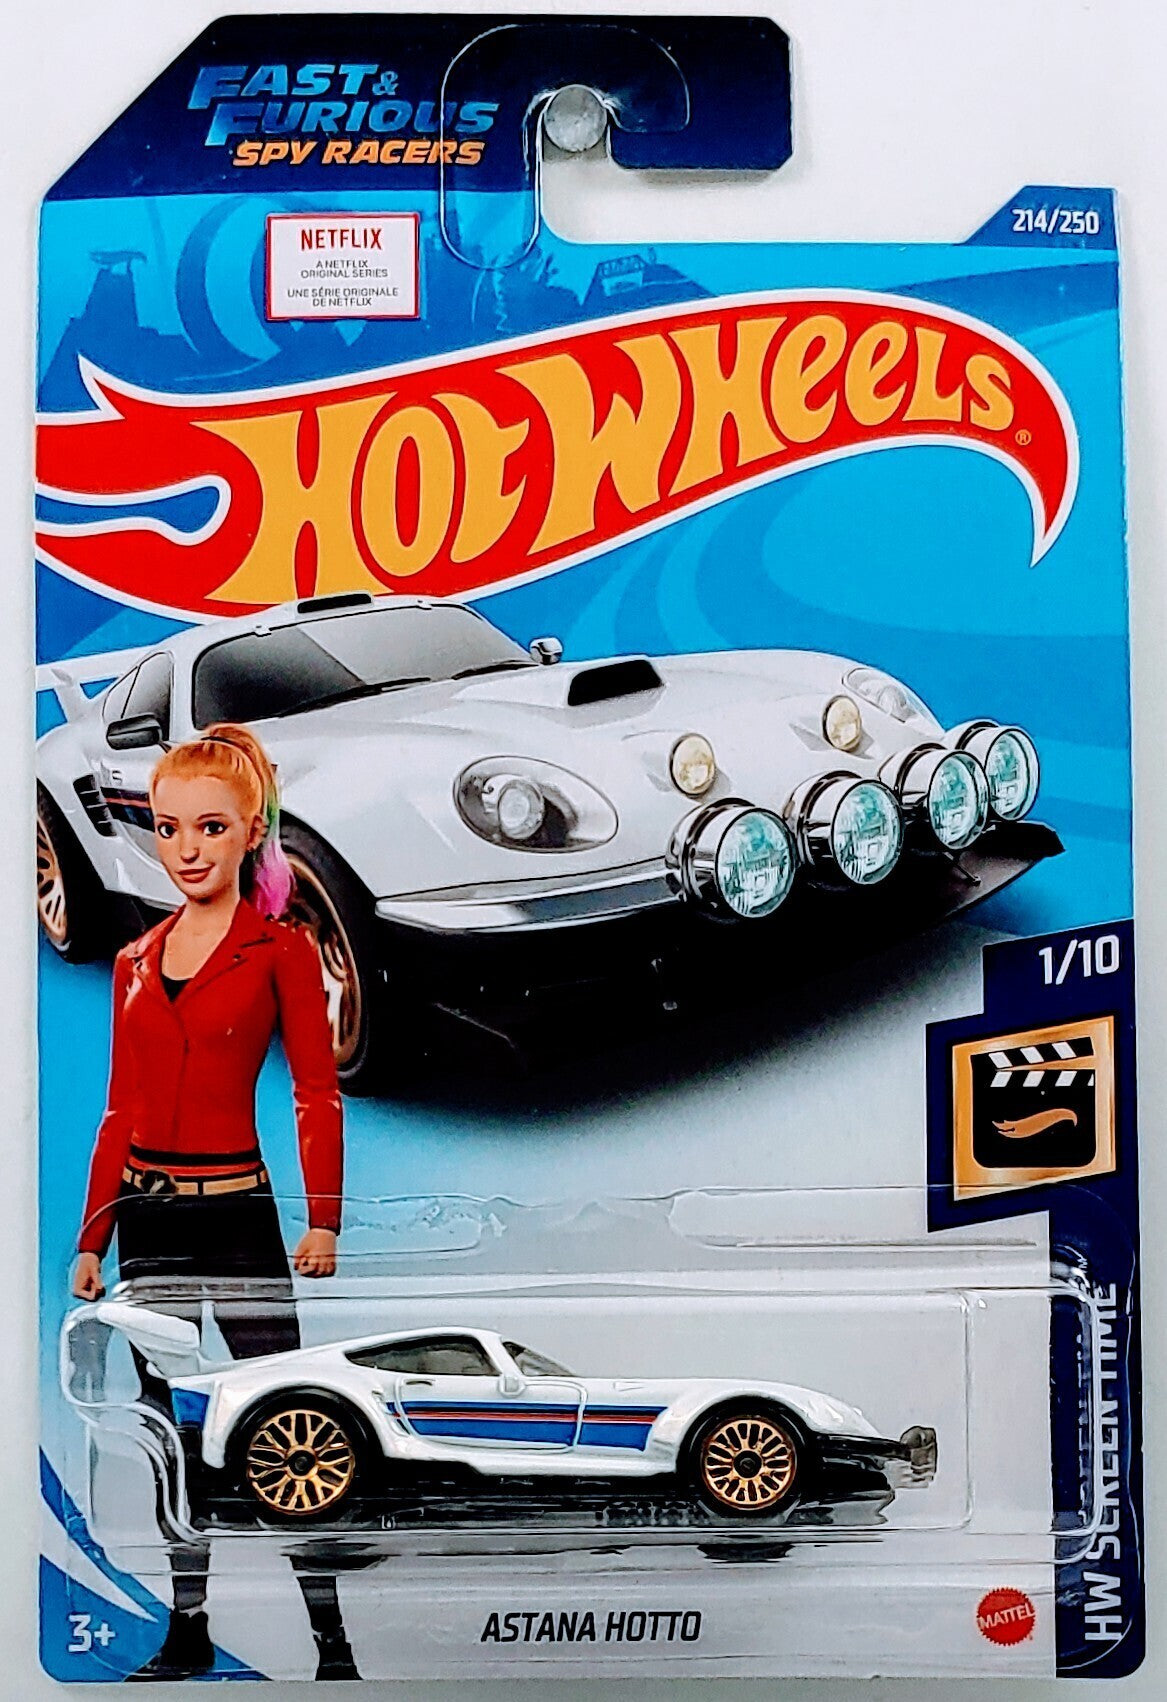 Hot Wheels 2020 - Collector # 214/250 - HW Screen Time 1/10 - Astana Hotto - White - International Long Card with F&F Spy Racers Promo